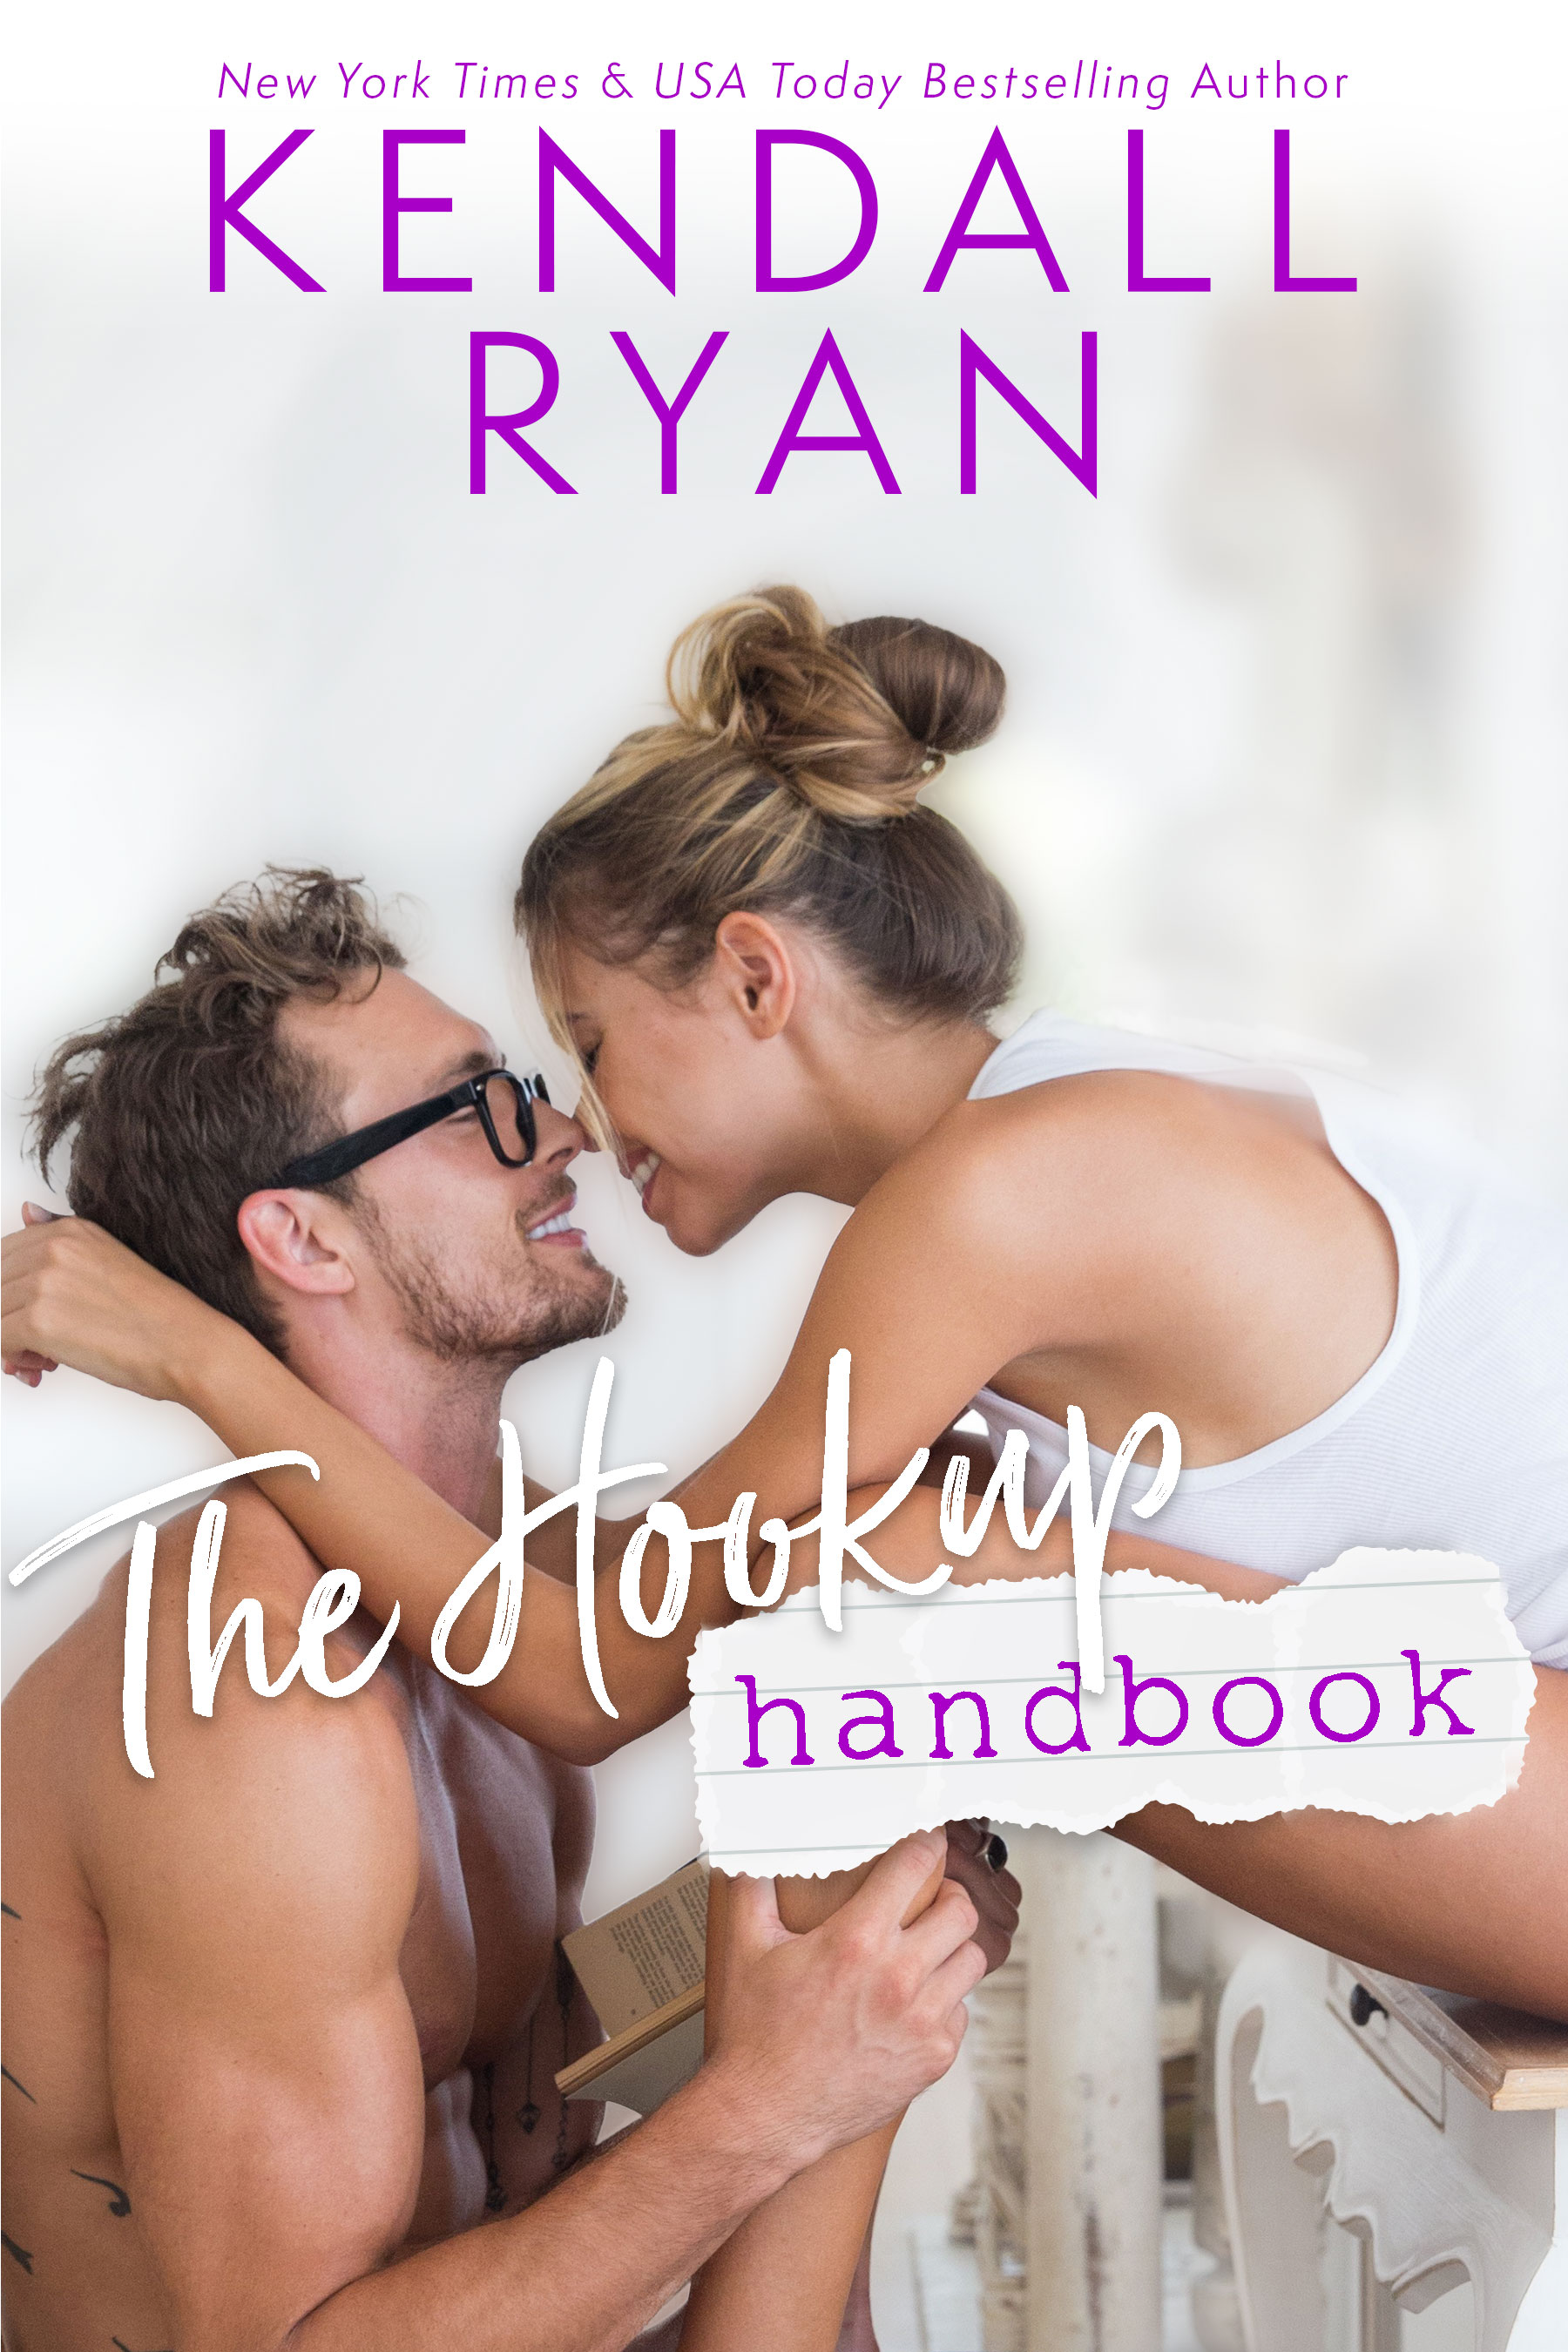 The Hookup Handbook by Kendall Ryan [Review]